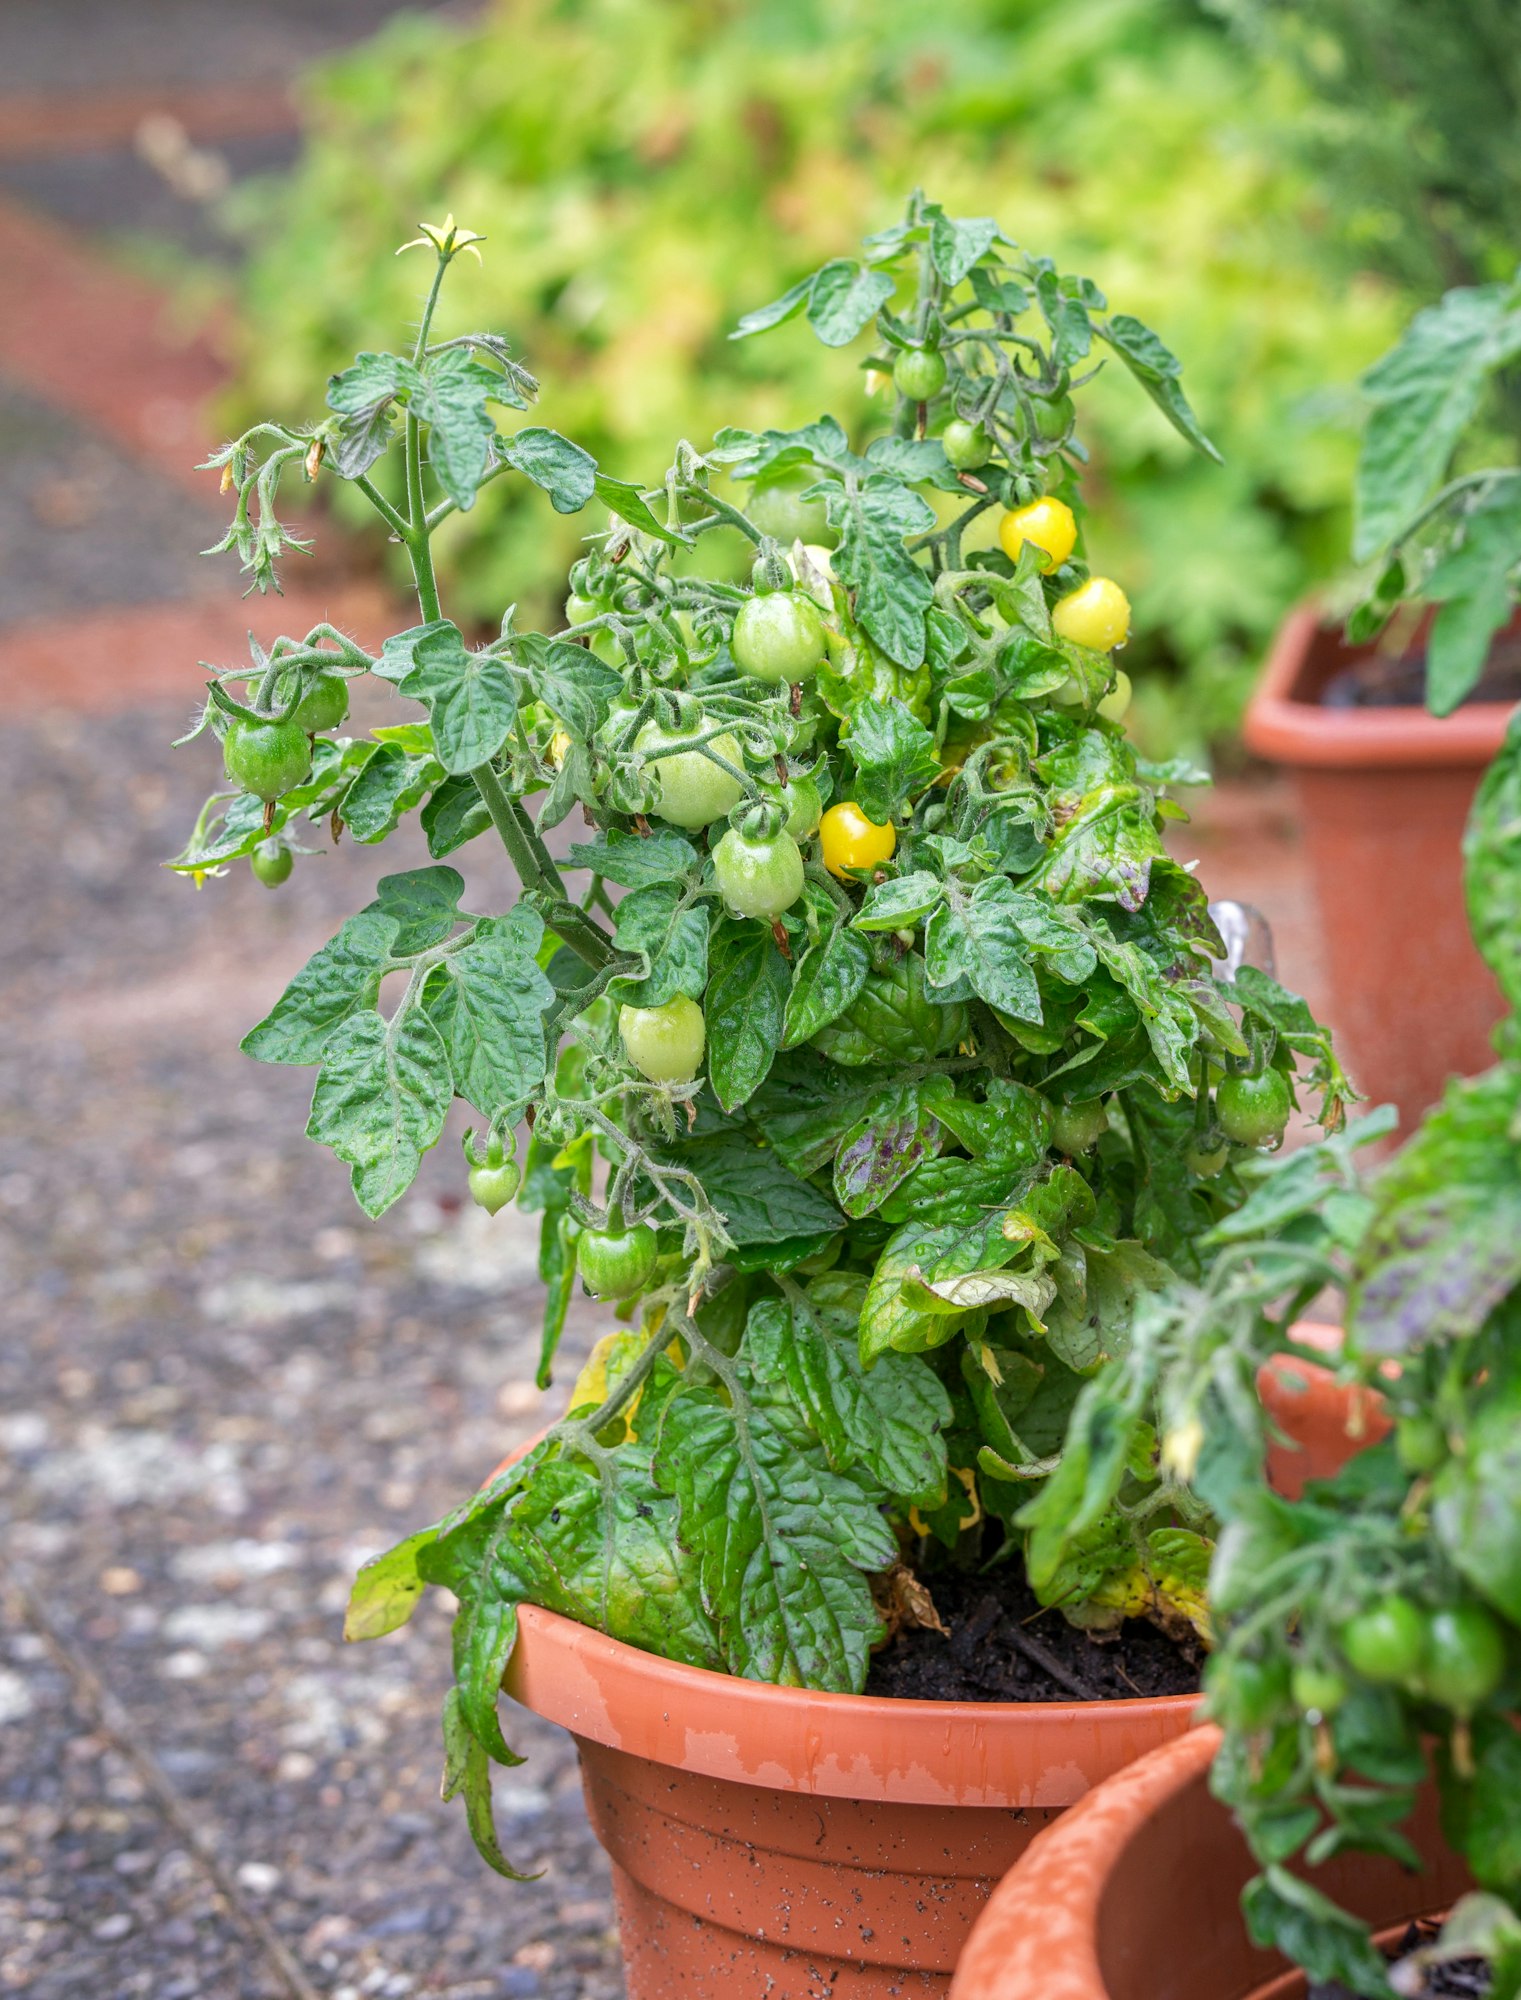 Caring for Your Tomato Plants